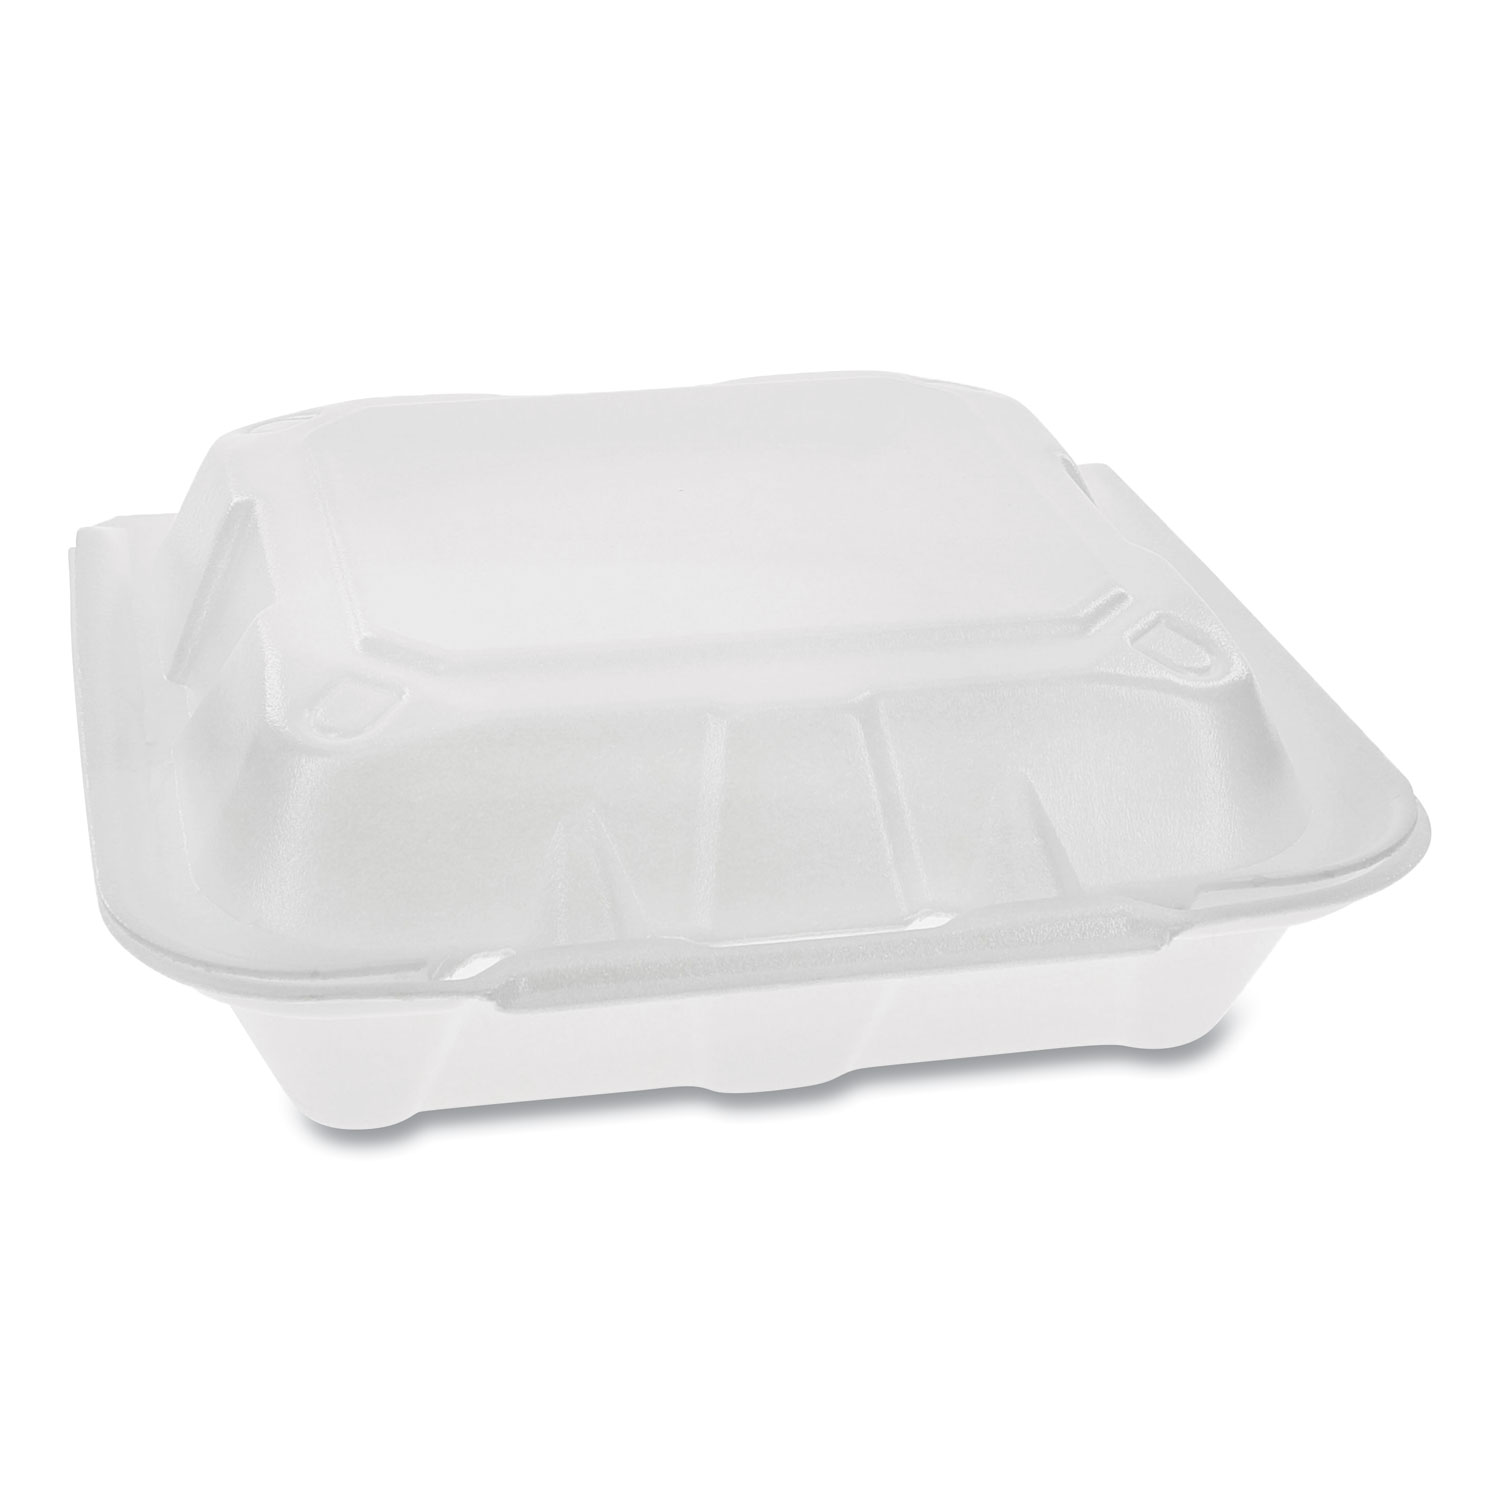  Pactiv YTD18801ECON Foam Hinged Lid Containers, Dual Tab Lock Economy, 8.42 x 8.15 x 3, 1-Compartment, White, 150/Carton (PCTYTD18801ECON) 